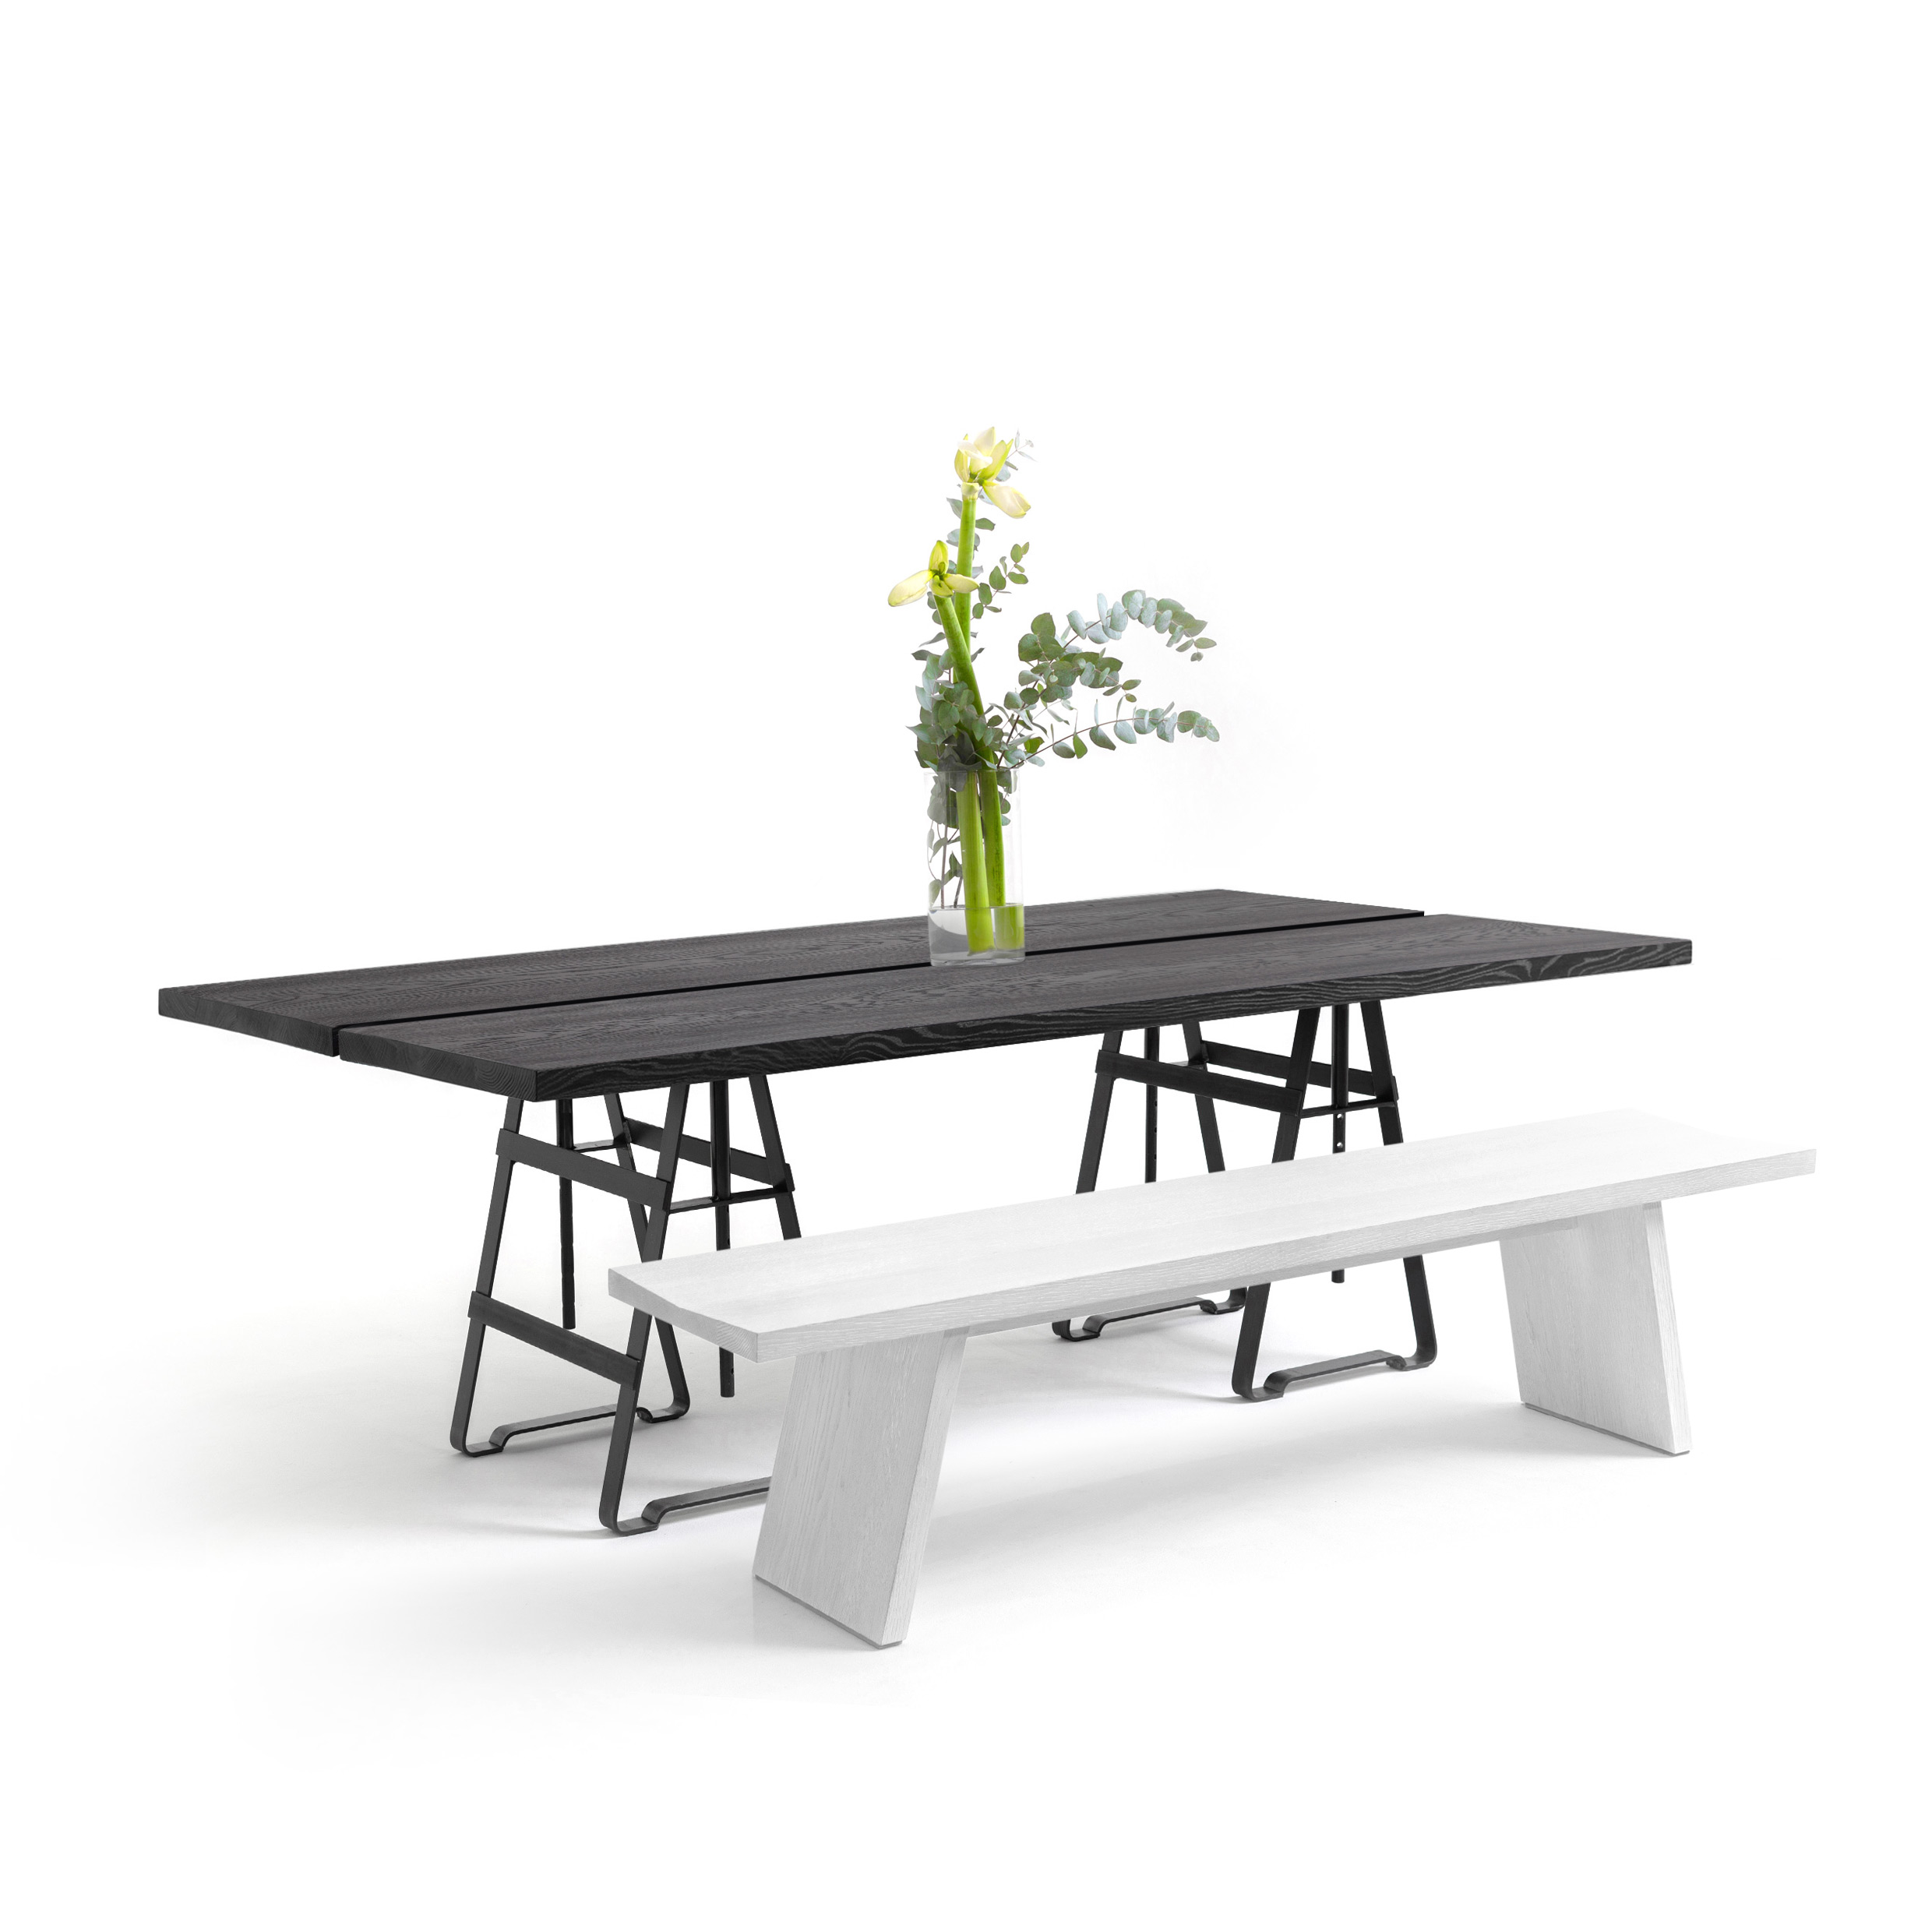 FORM EXCLUSIVE // JOON - IN-/OUTDOOR TABLE | BLACK CHARLED - RAW MONKEY - 220CM X 45CM X 5CM